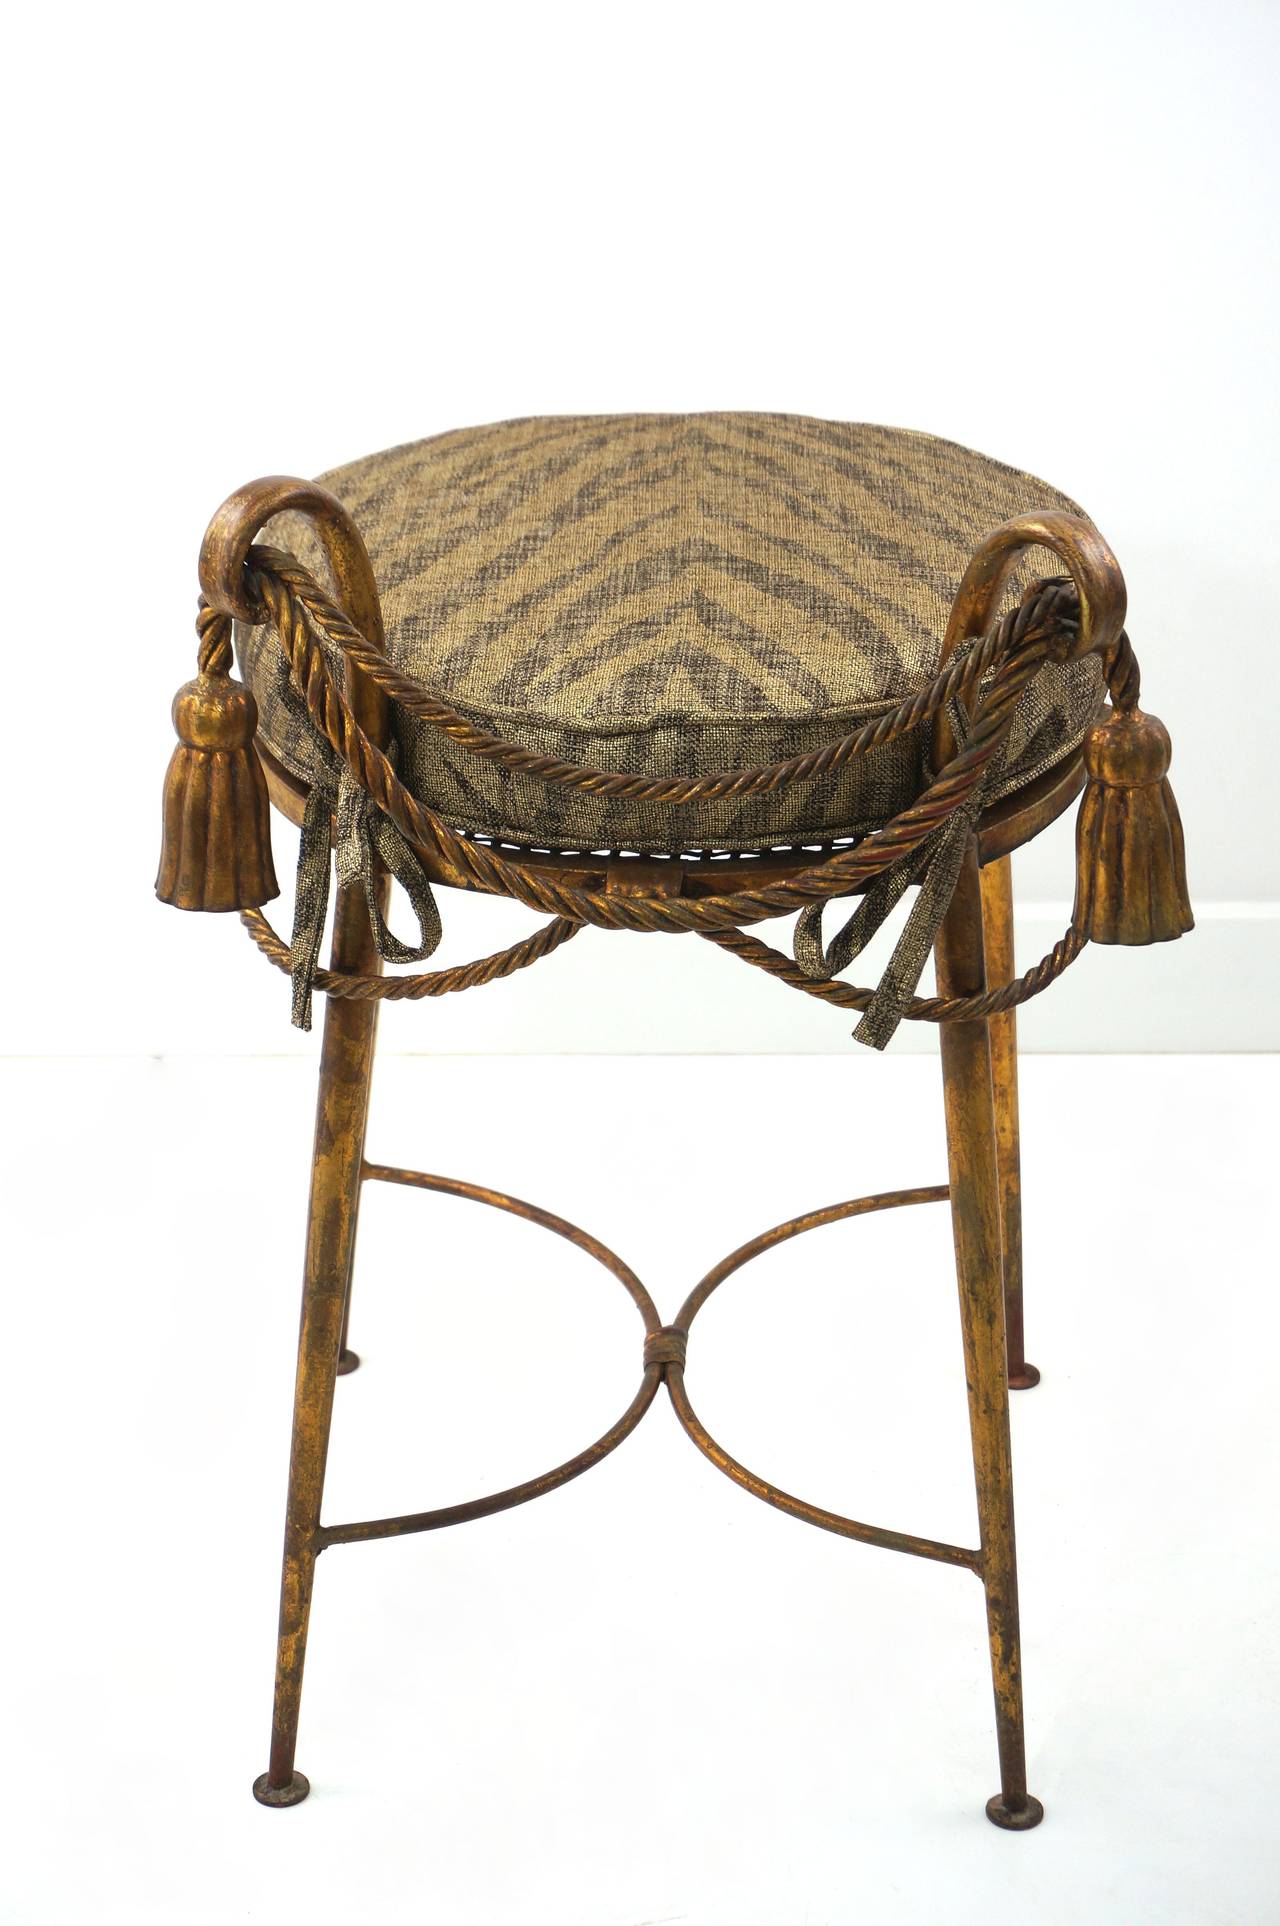 Mid-Century gilded iron vanity stool with rope and tassel details and a custom-made tiger pattern cushion, not shown. Contact dealer for photos.

Please feel free to contact us directly for the best price, a shipping quote or any additional